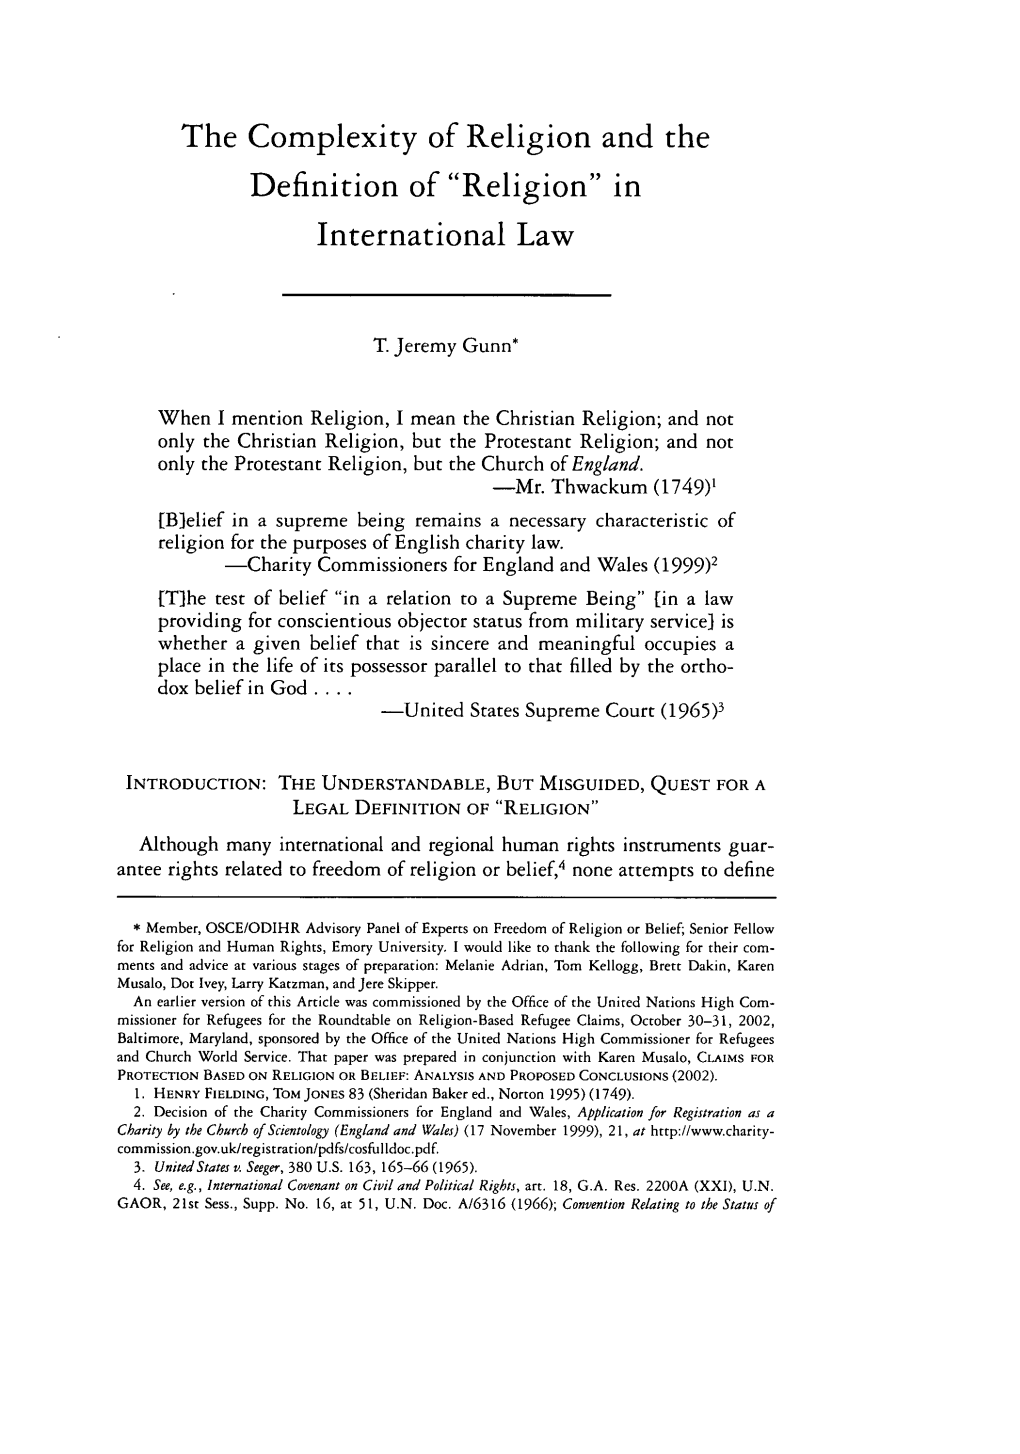 Religion and the Definition of "Religion" in International Law